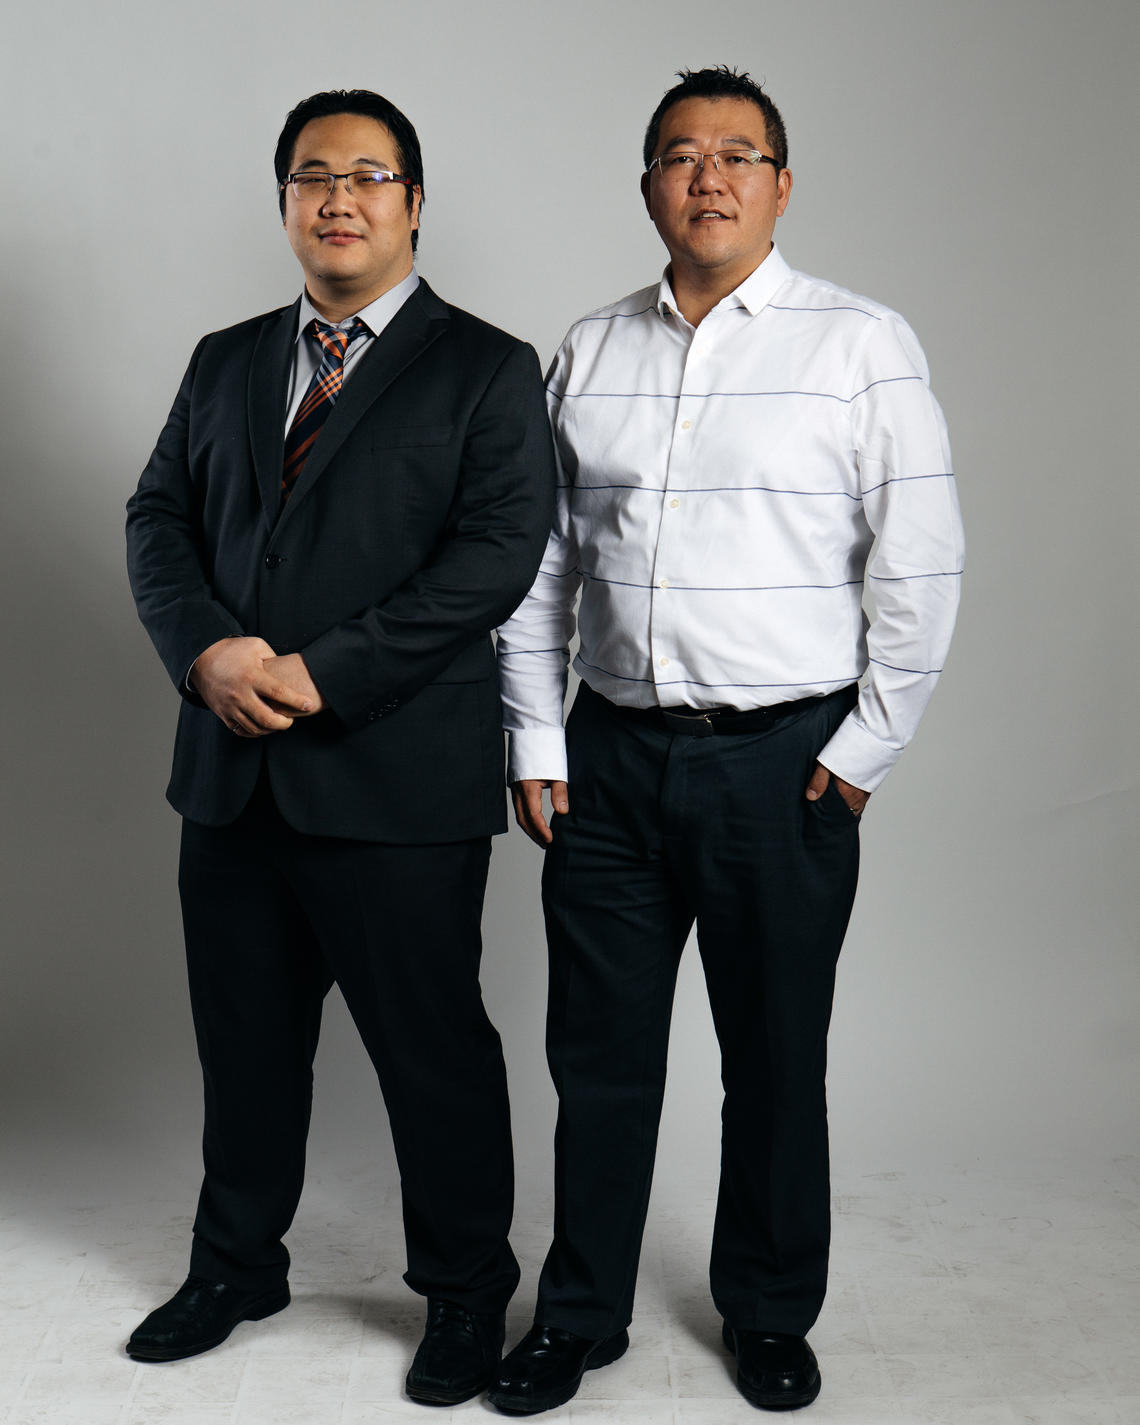 Schulich School of Engineering’s Chaneel Park, left, and Simon Park of MakeSens. MakeSens has already filed its CDL-Rockies application for 2018-19.